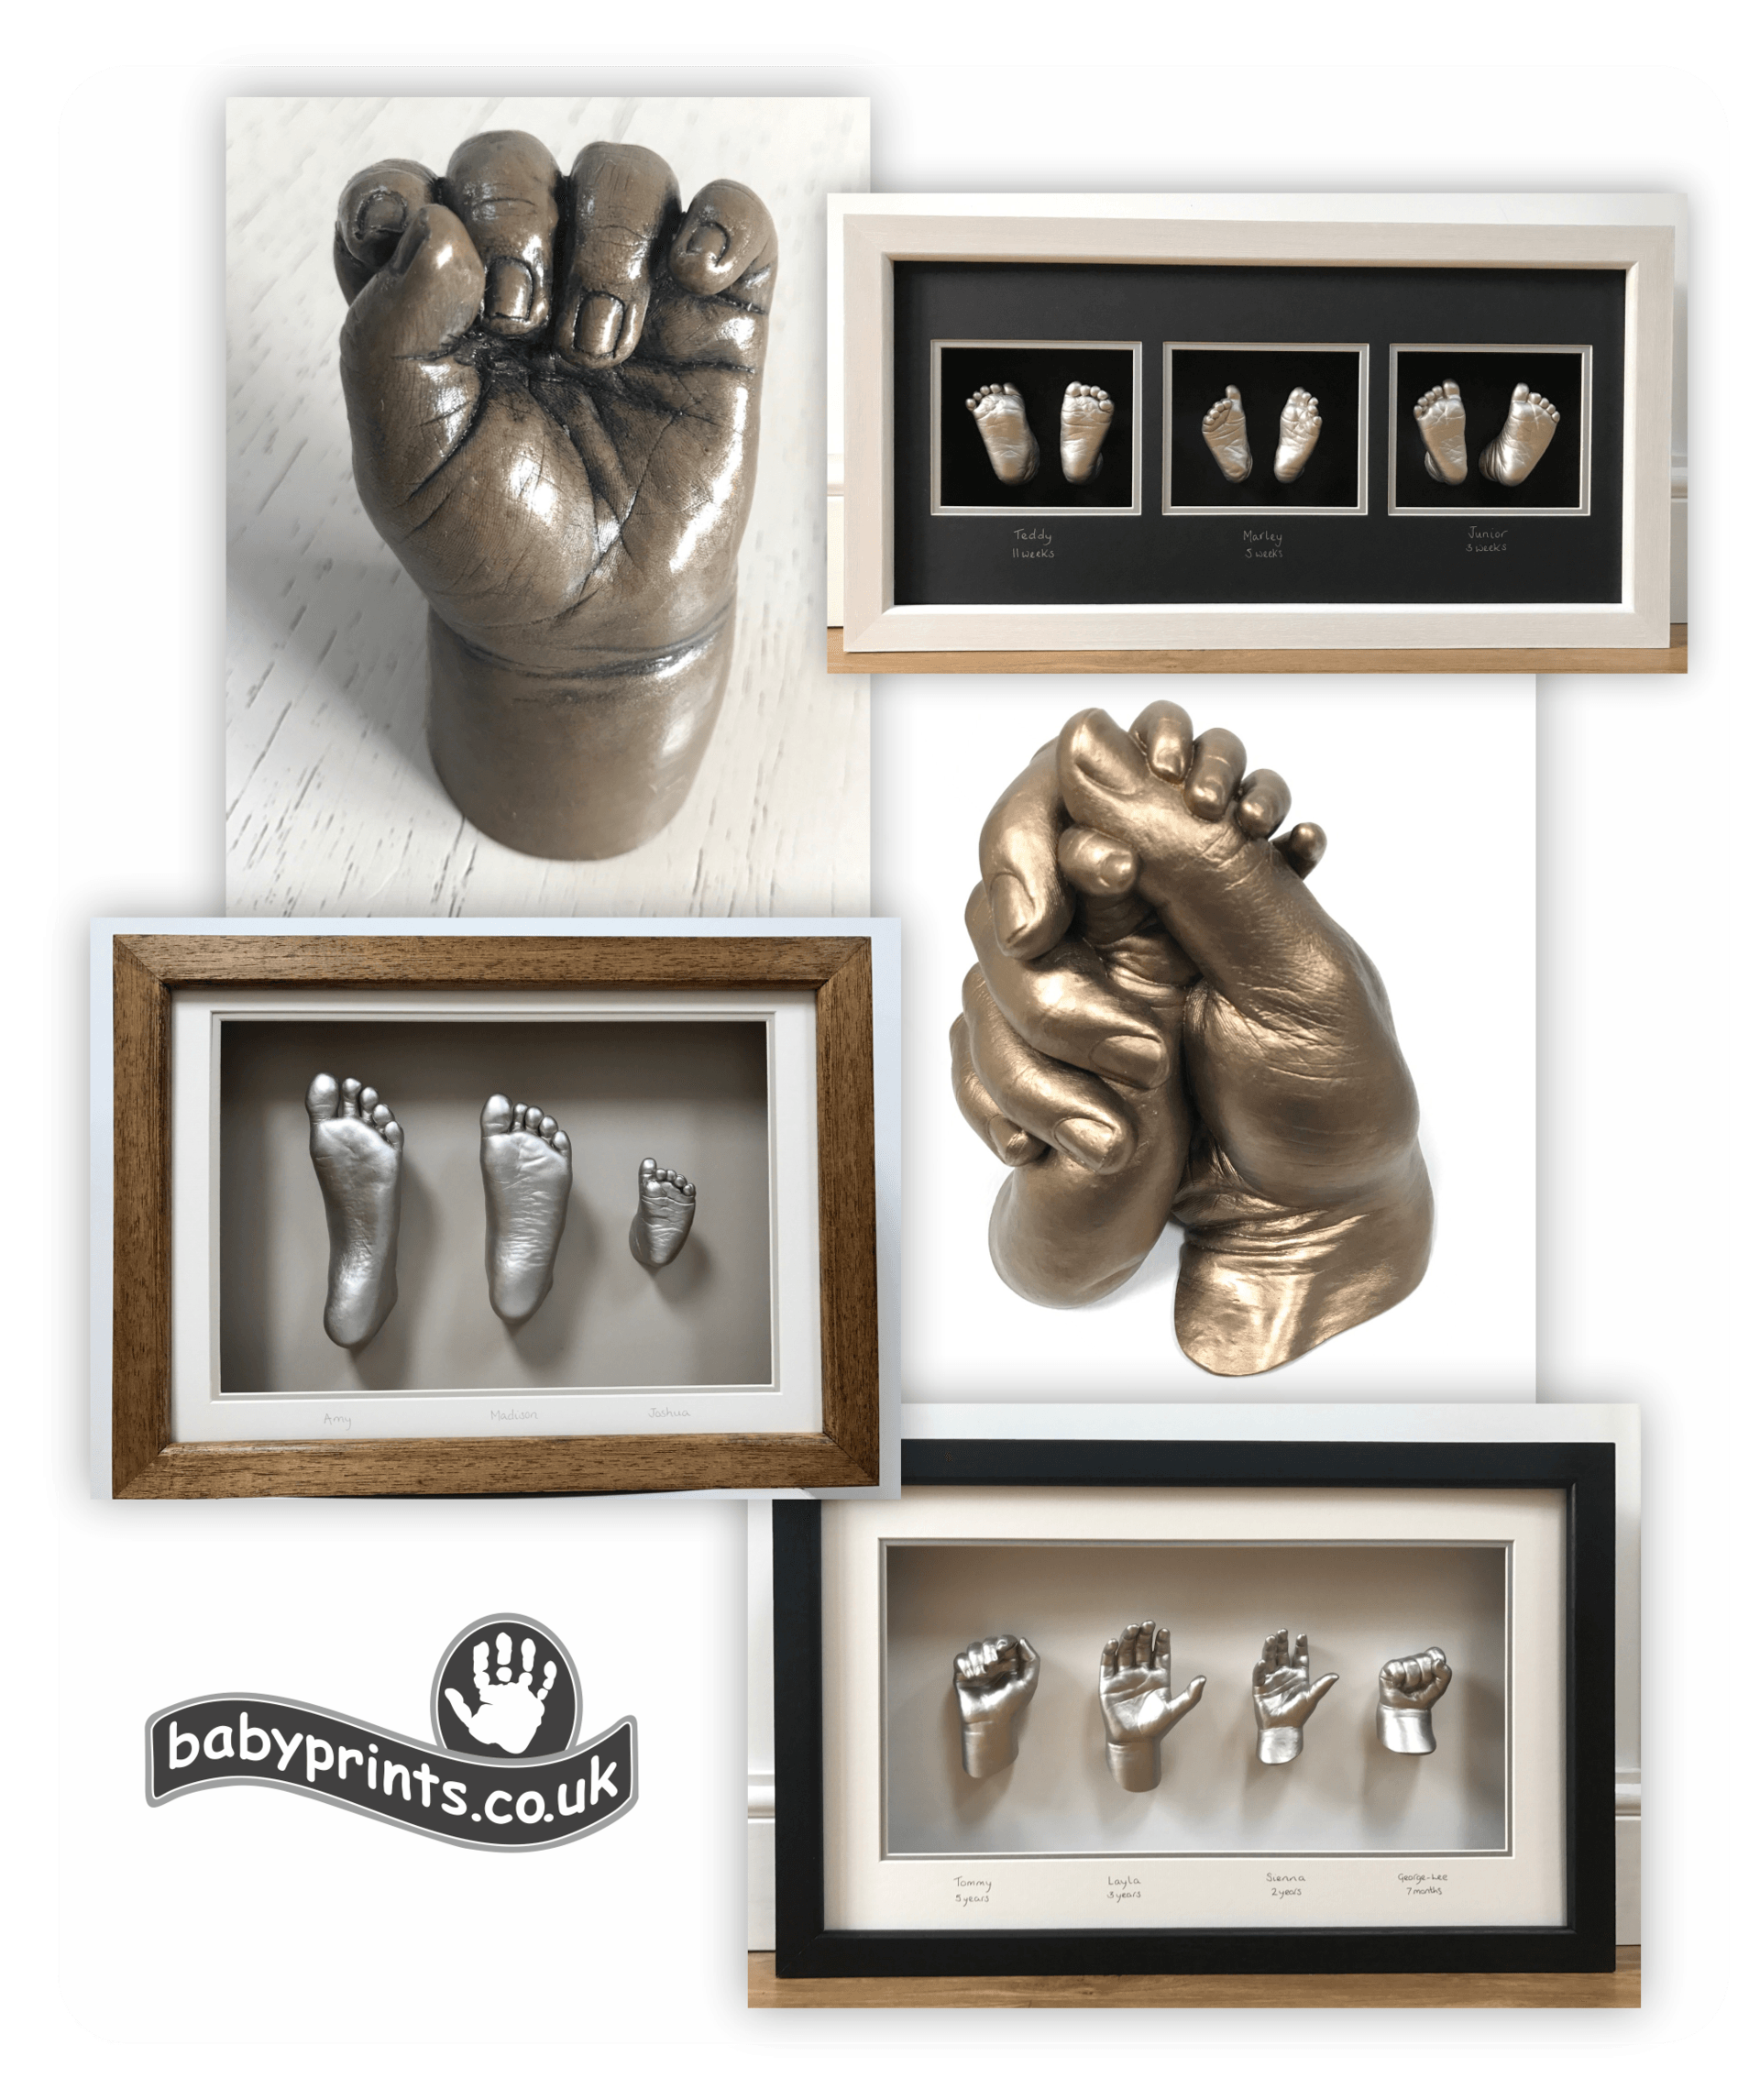 Buckinghamshire hands and feet casting